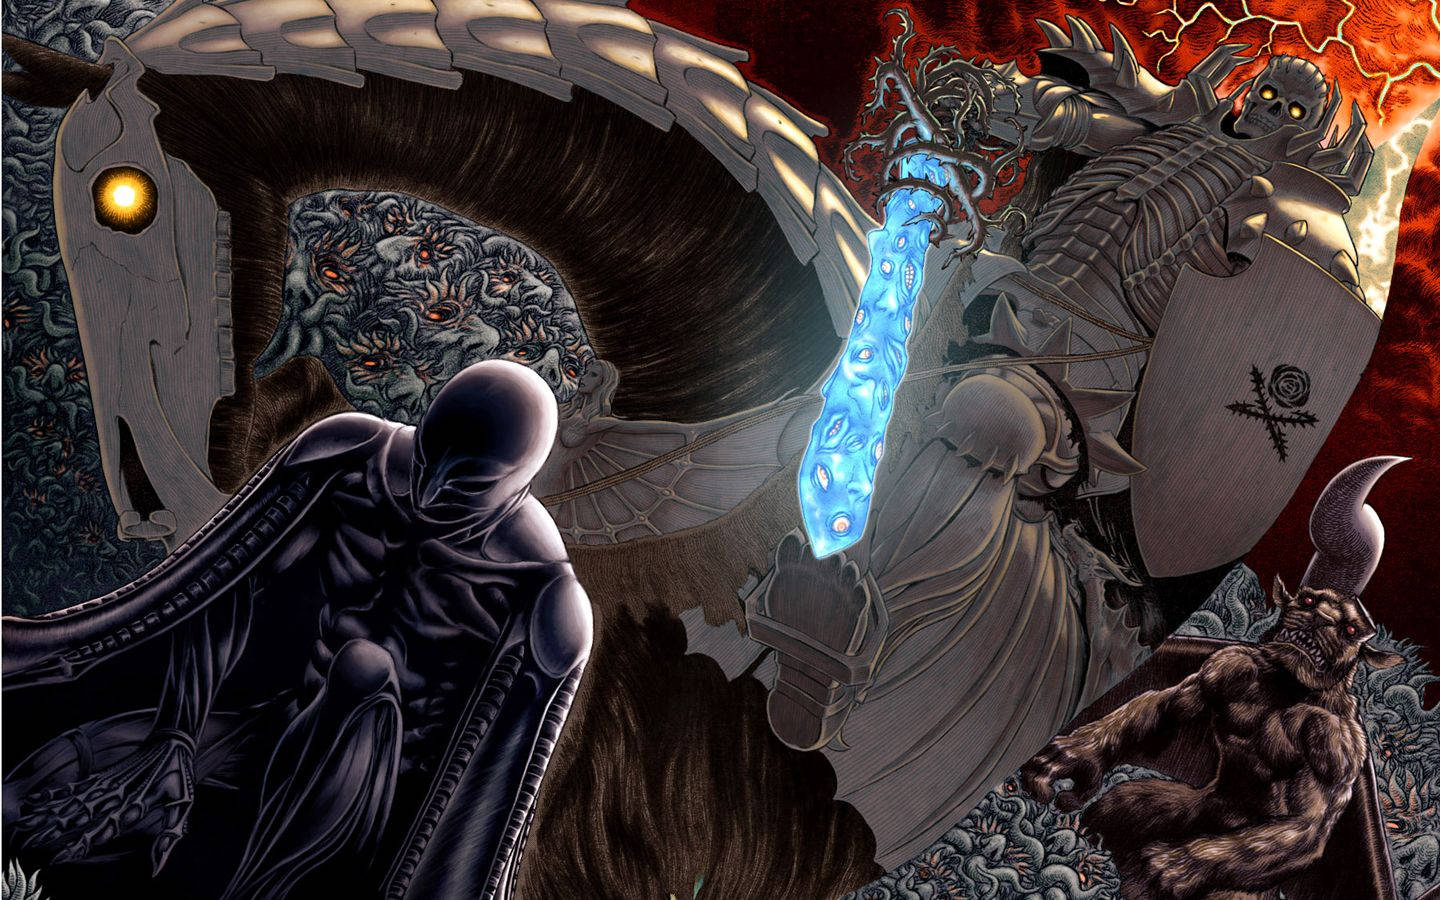 A look into the inner-workings of the world of Berserk Wallpaper